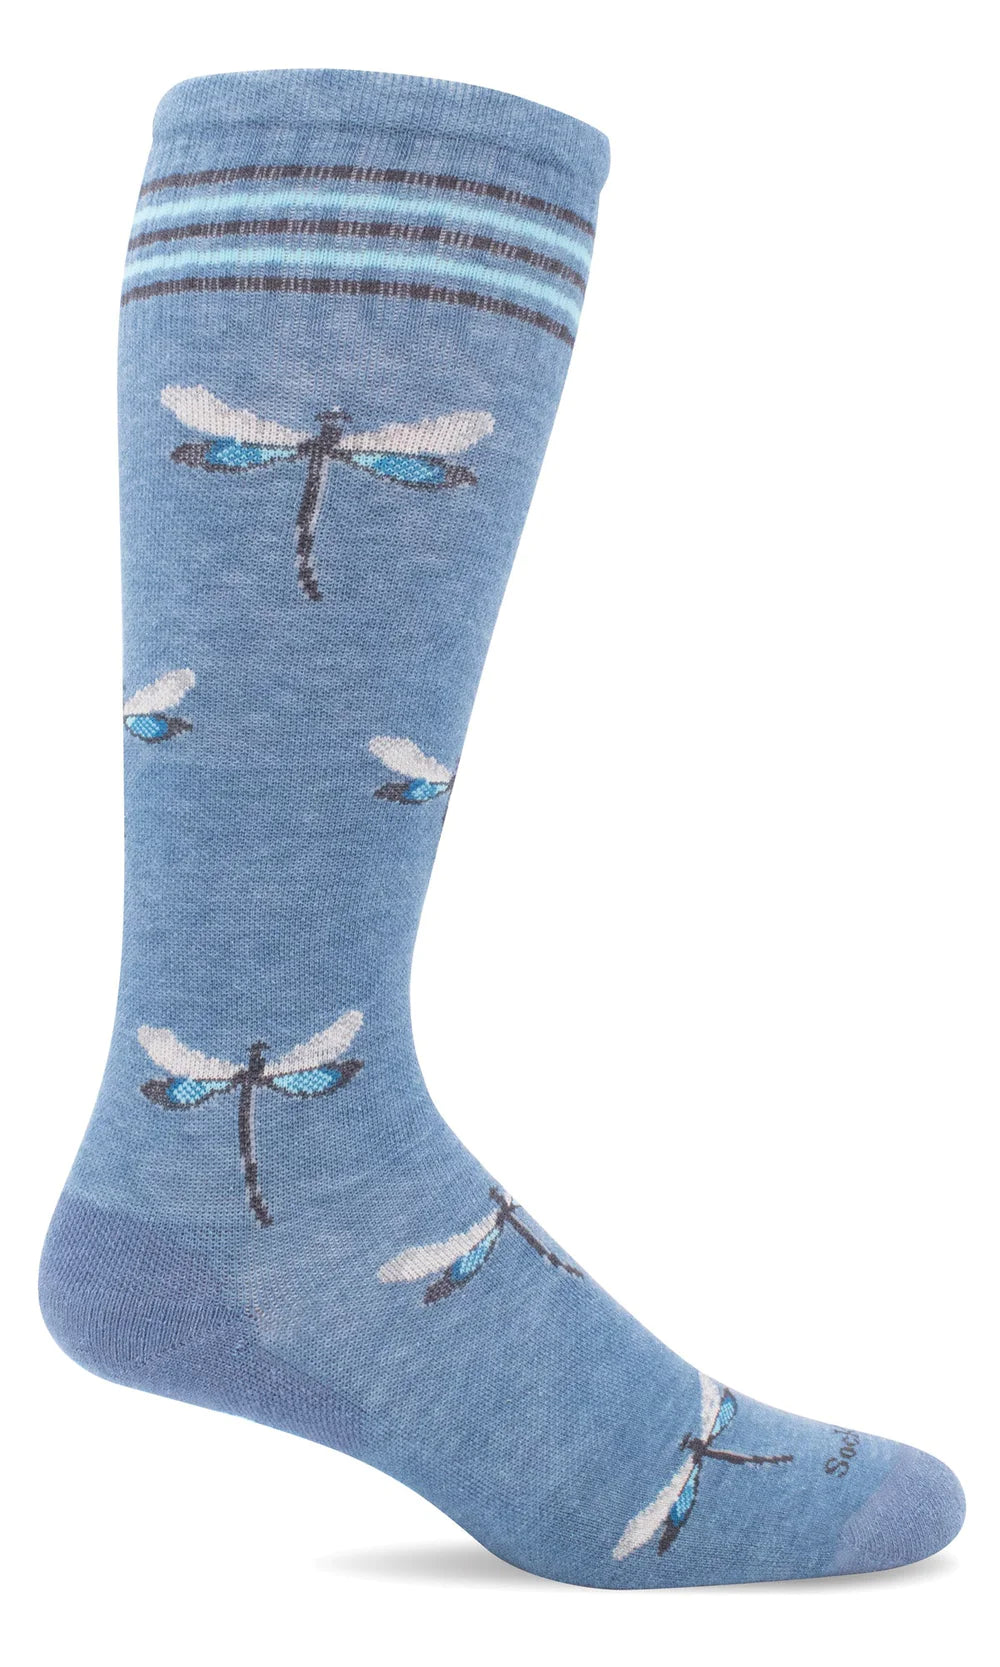 SOCKWELL WOMEN'S DRAGONFLY - MODERATE GRADUATED COMPRESSION SOCKS - BLUESTONE WITH SPARKLE